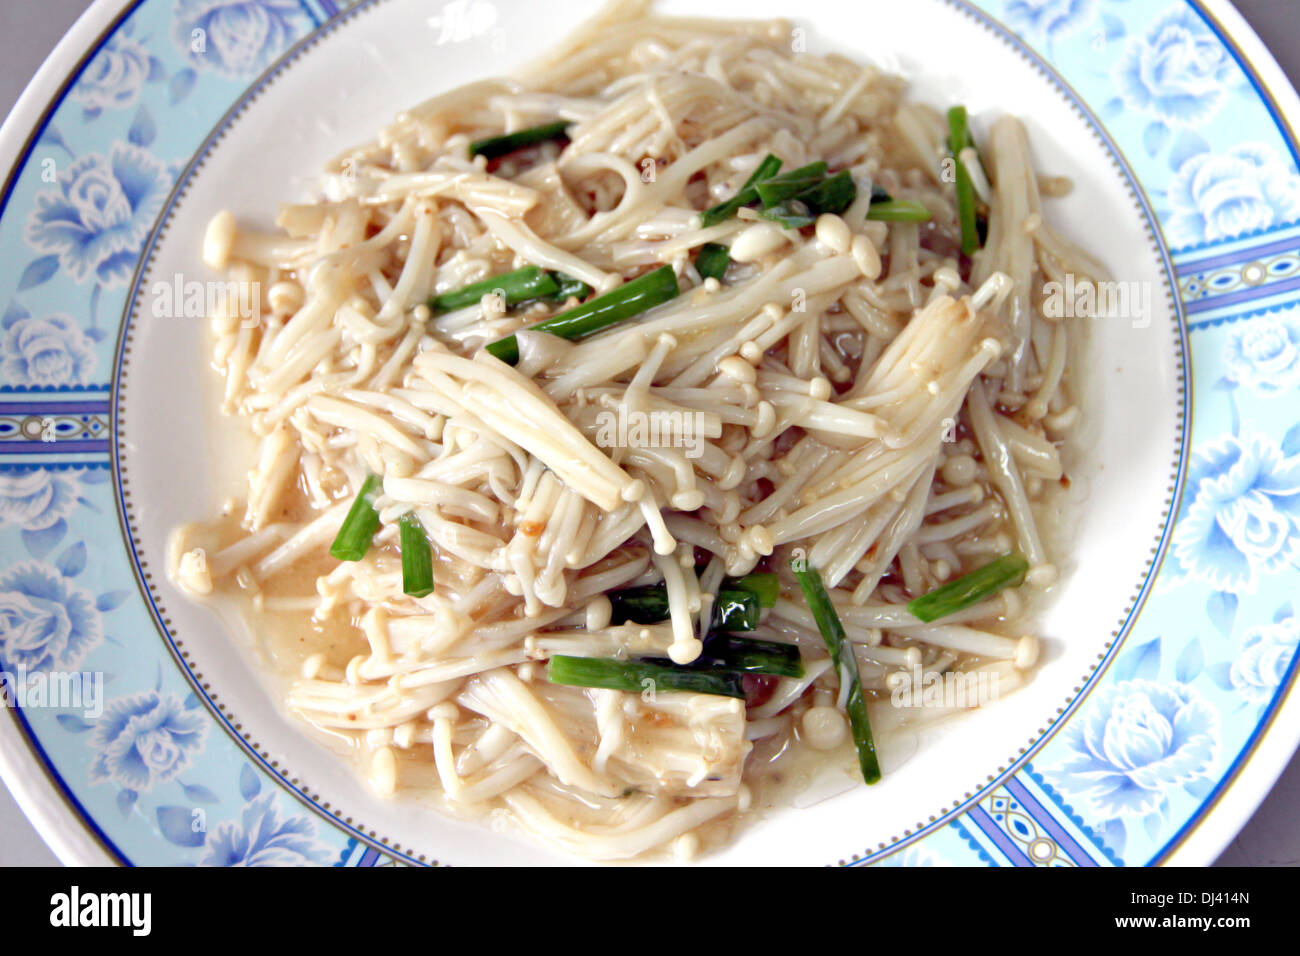 Mushrooms mixing with pepper and basil, Local food in Thailand. Stock Photo